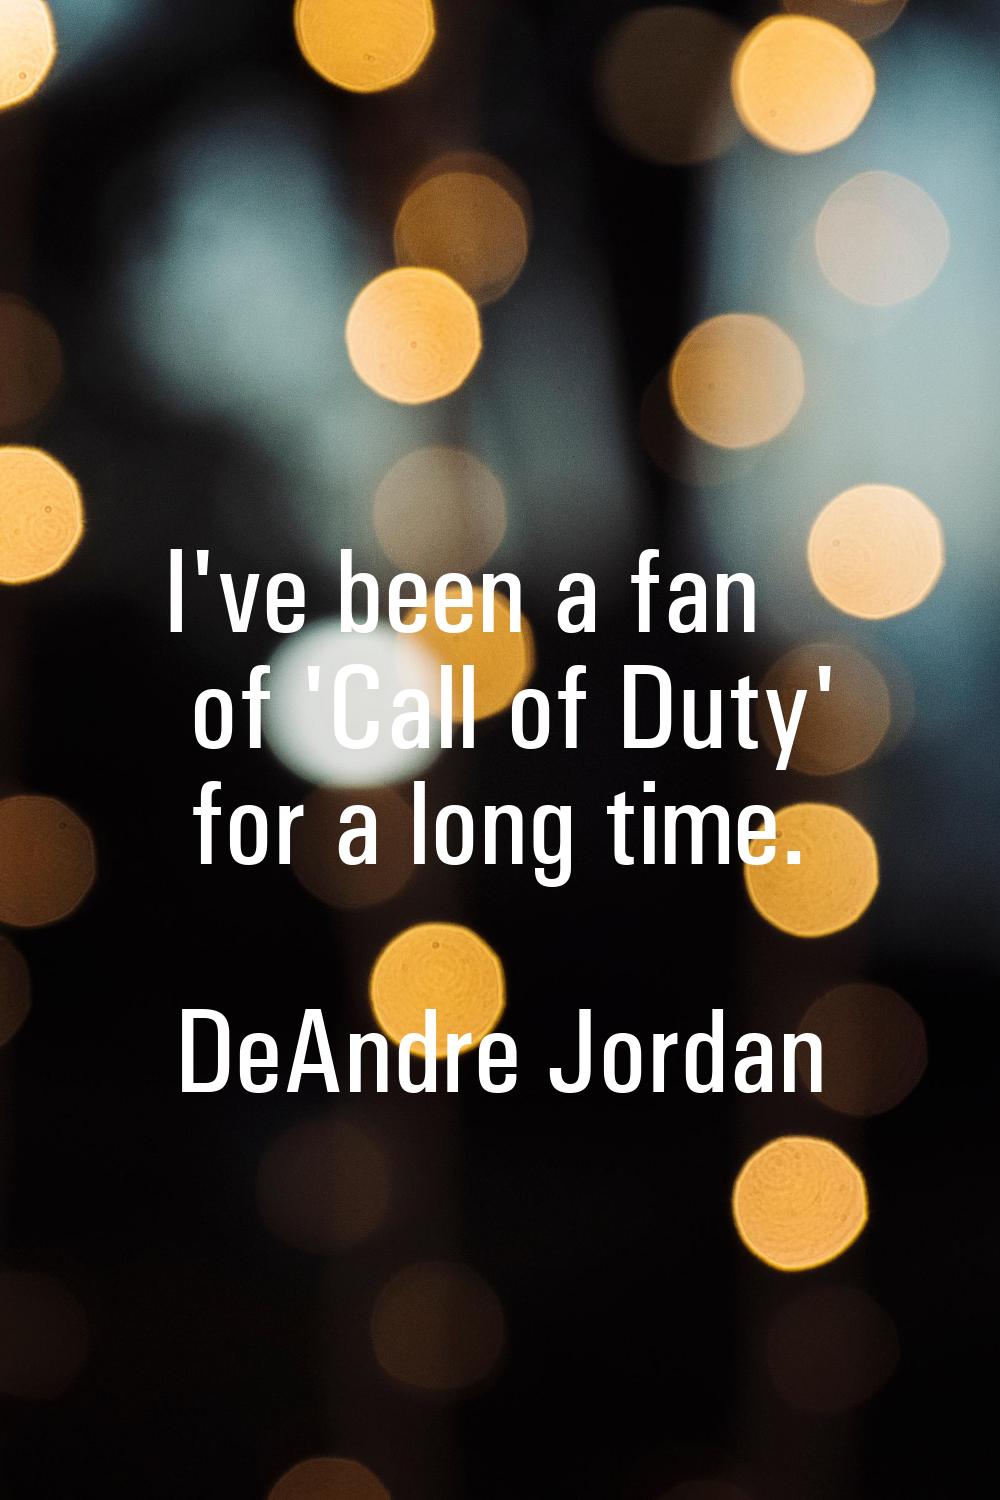 I've been a fan of 'Call of Duty' for a long time.